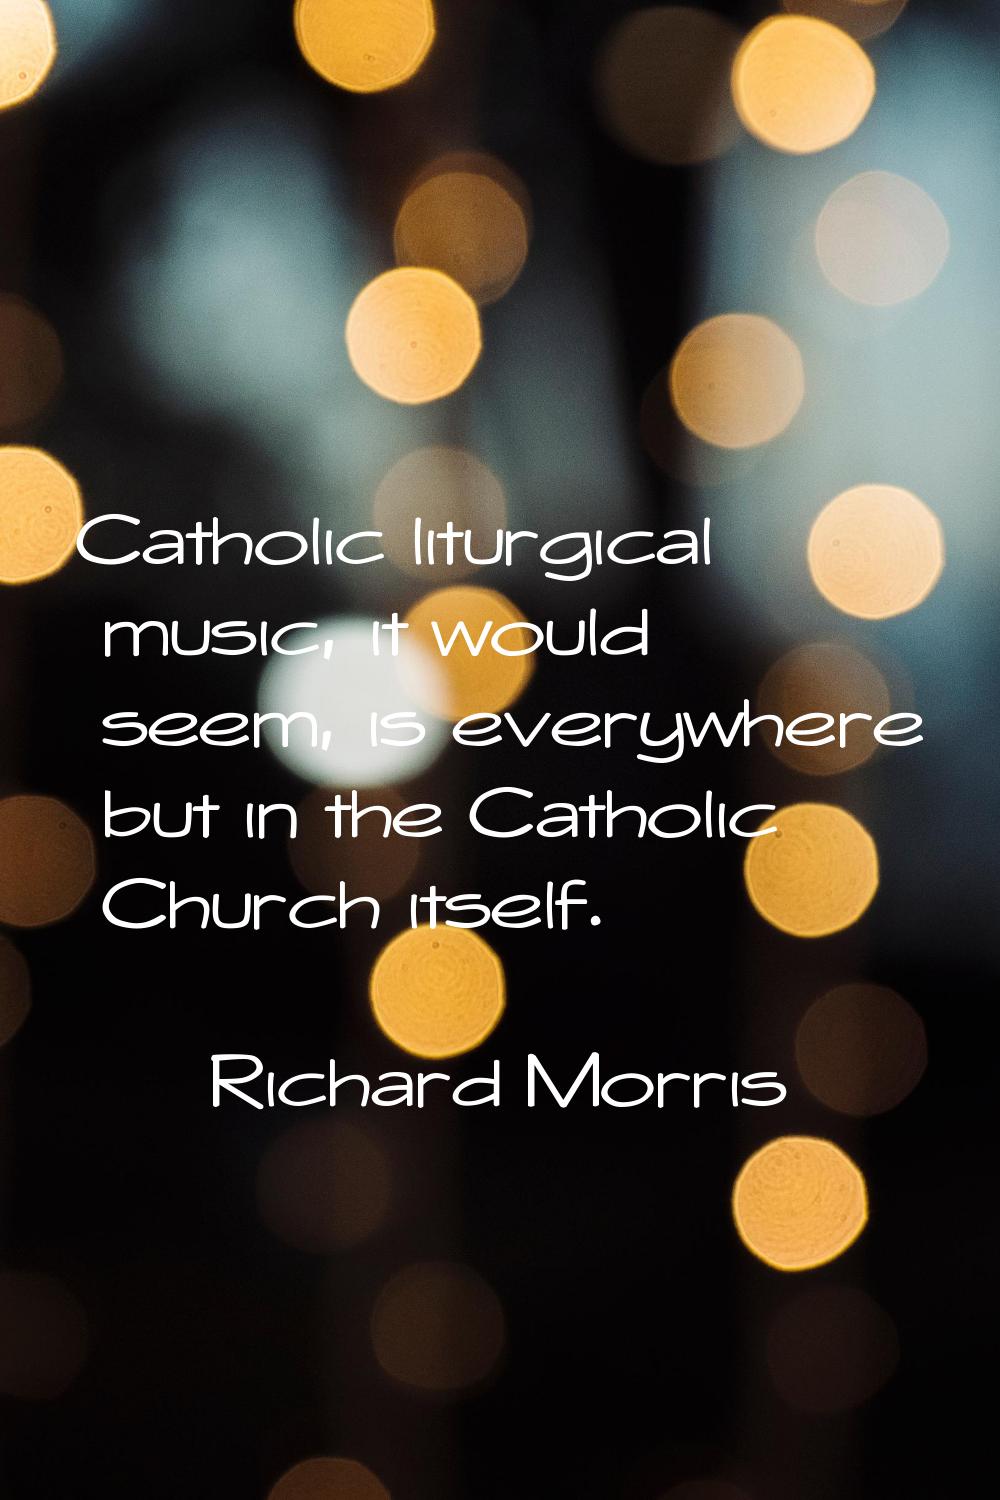 Catholic liturgical music, it would seem, is everywhere but in the Catholic Church itself.